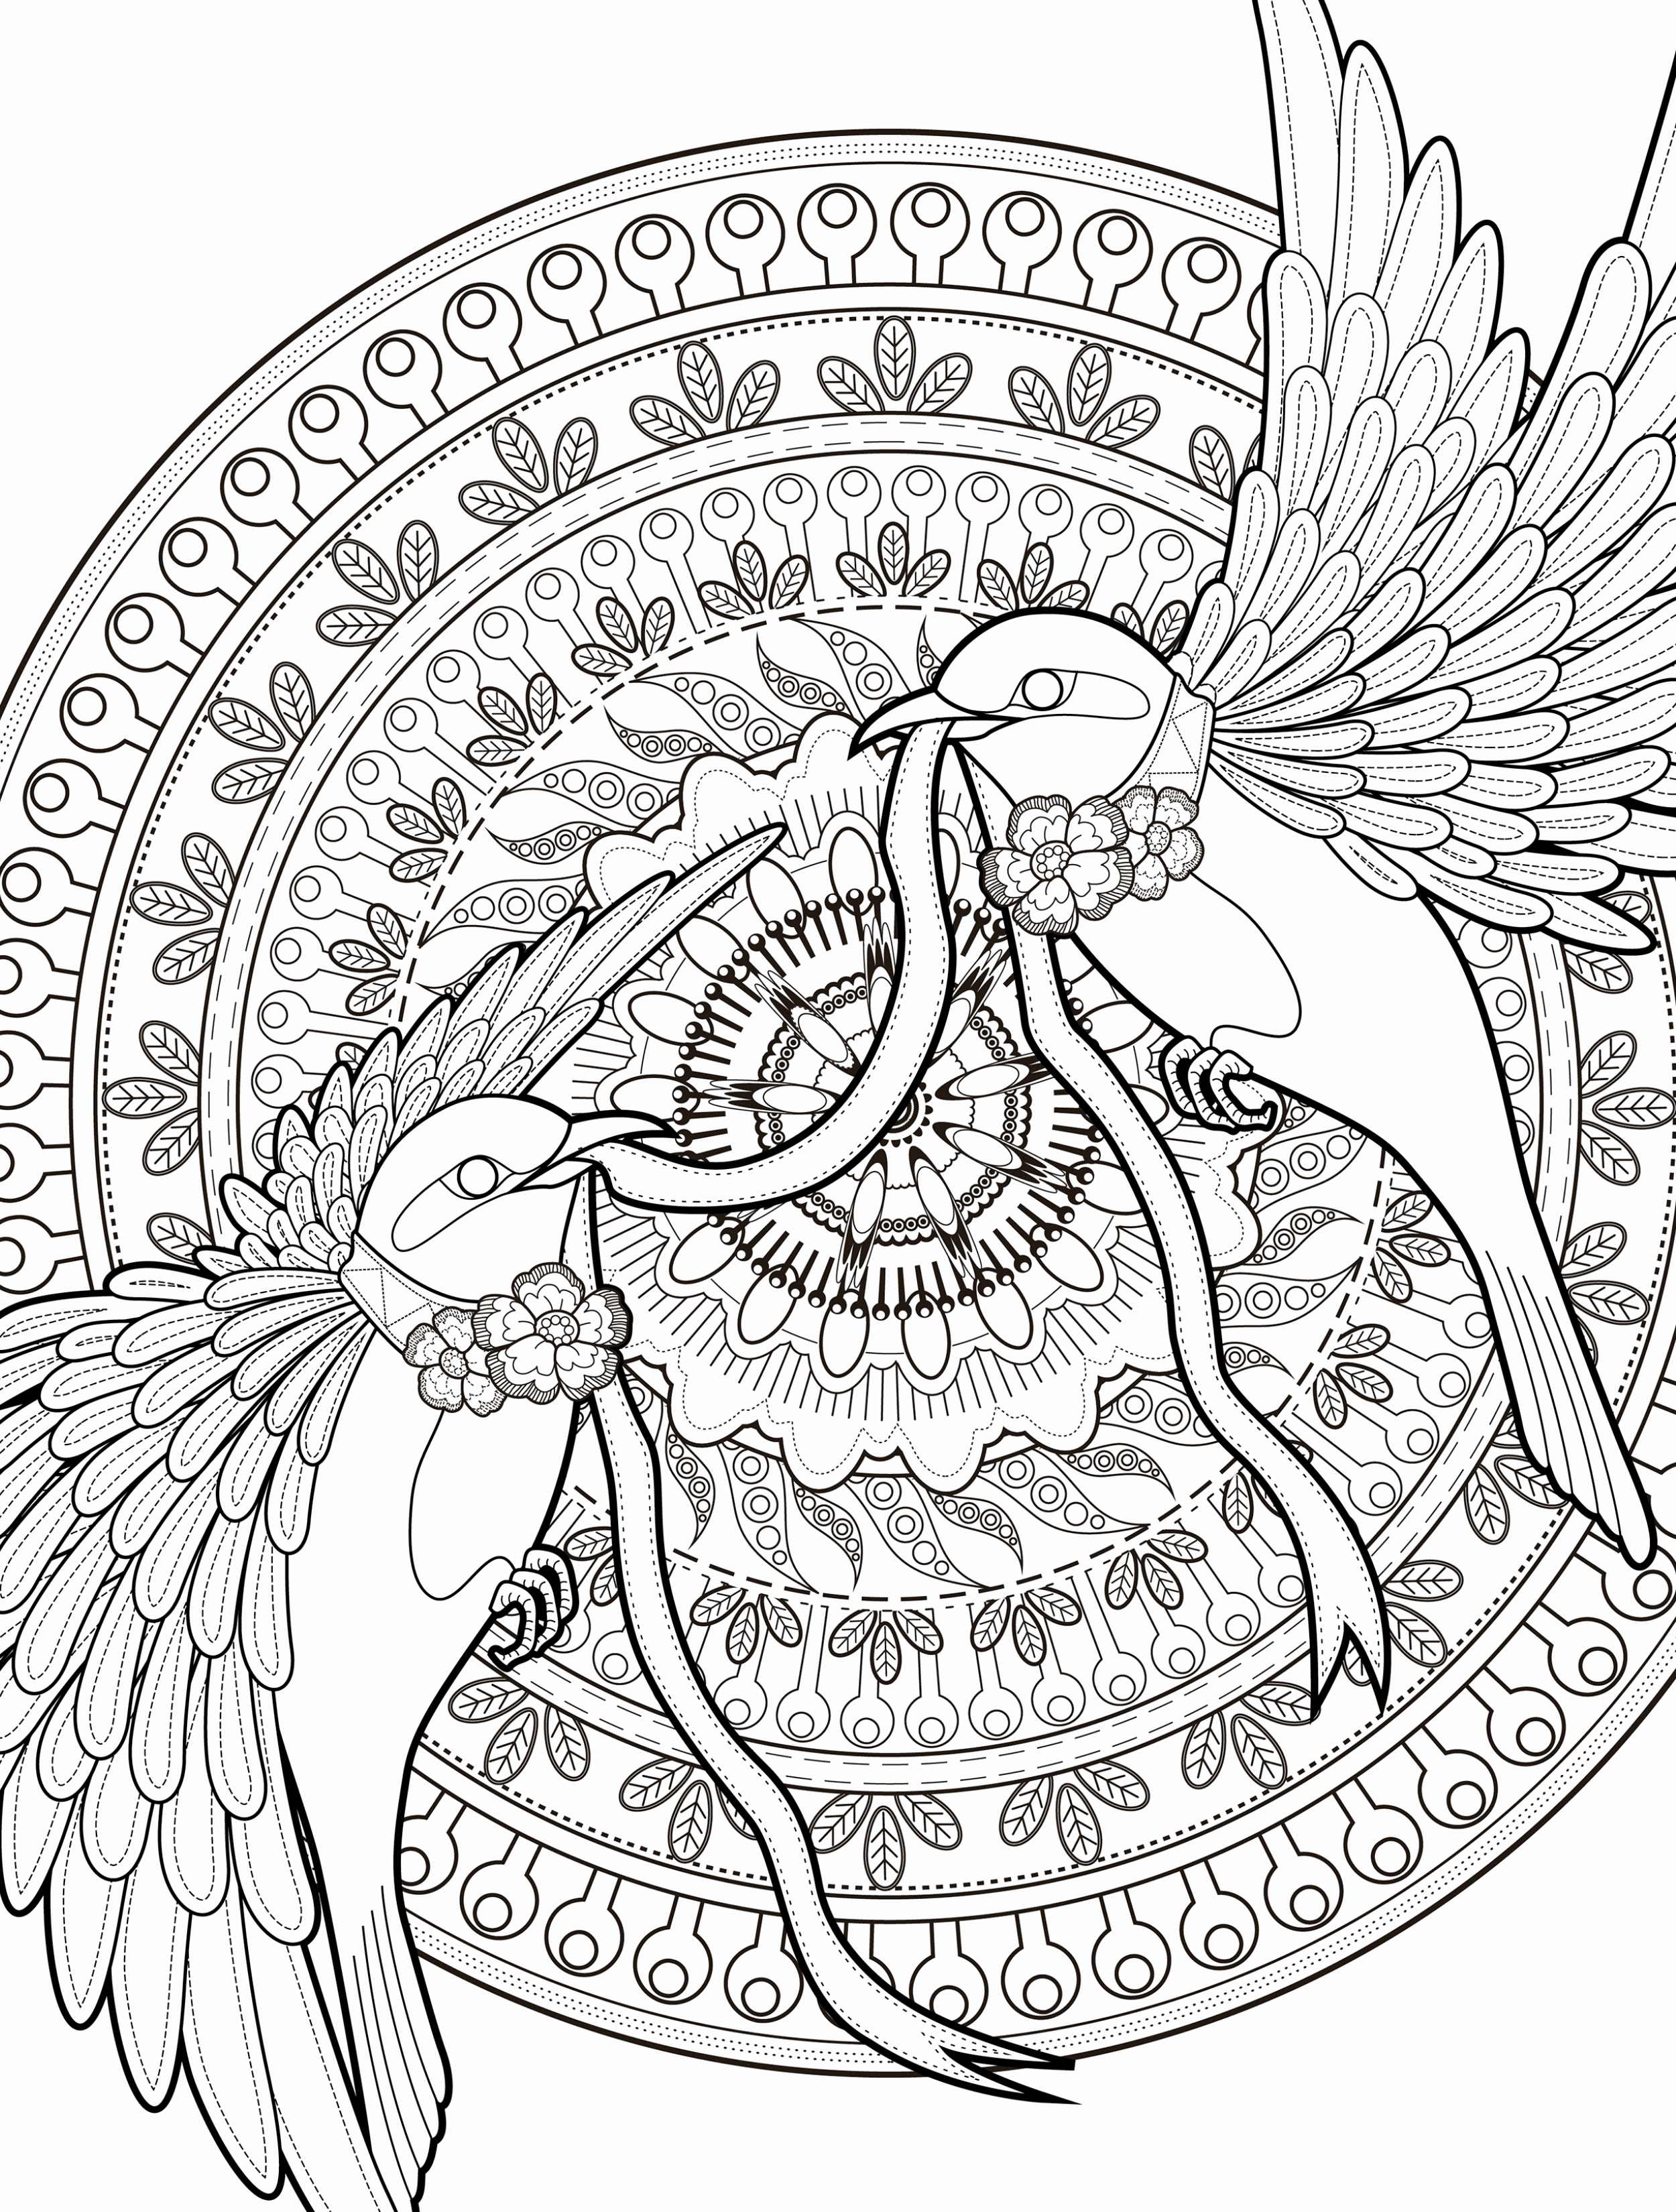 Free Adult Coloring Pages Pdf At Getcolorings Free Printable 13080 The Best Porn Website